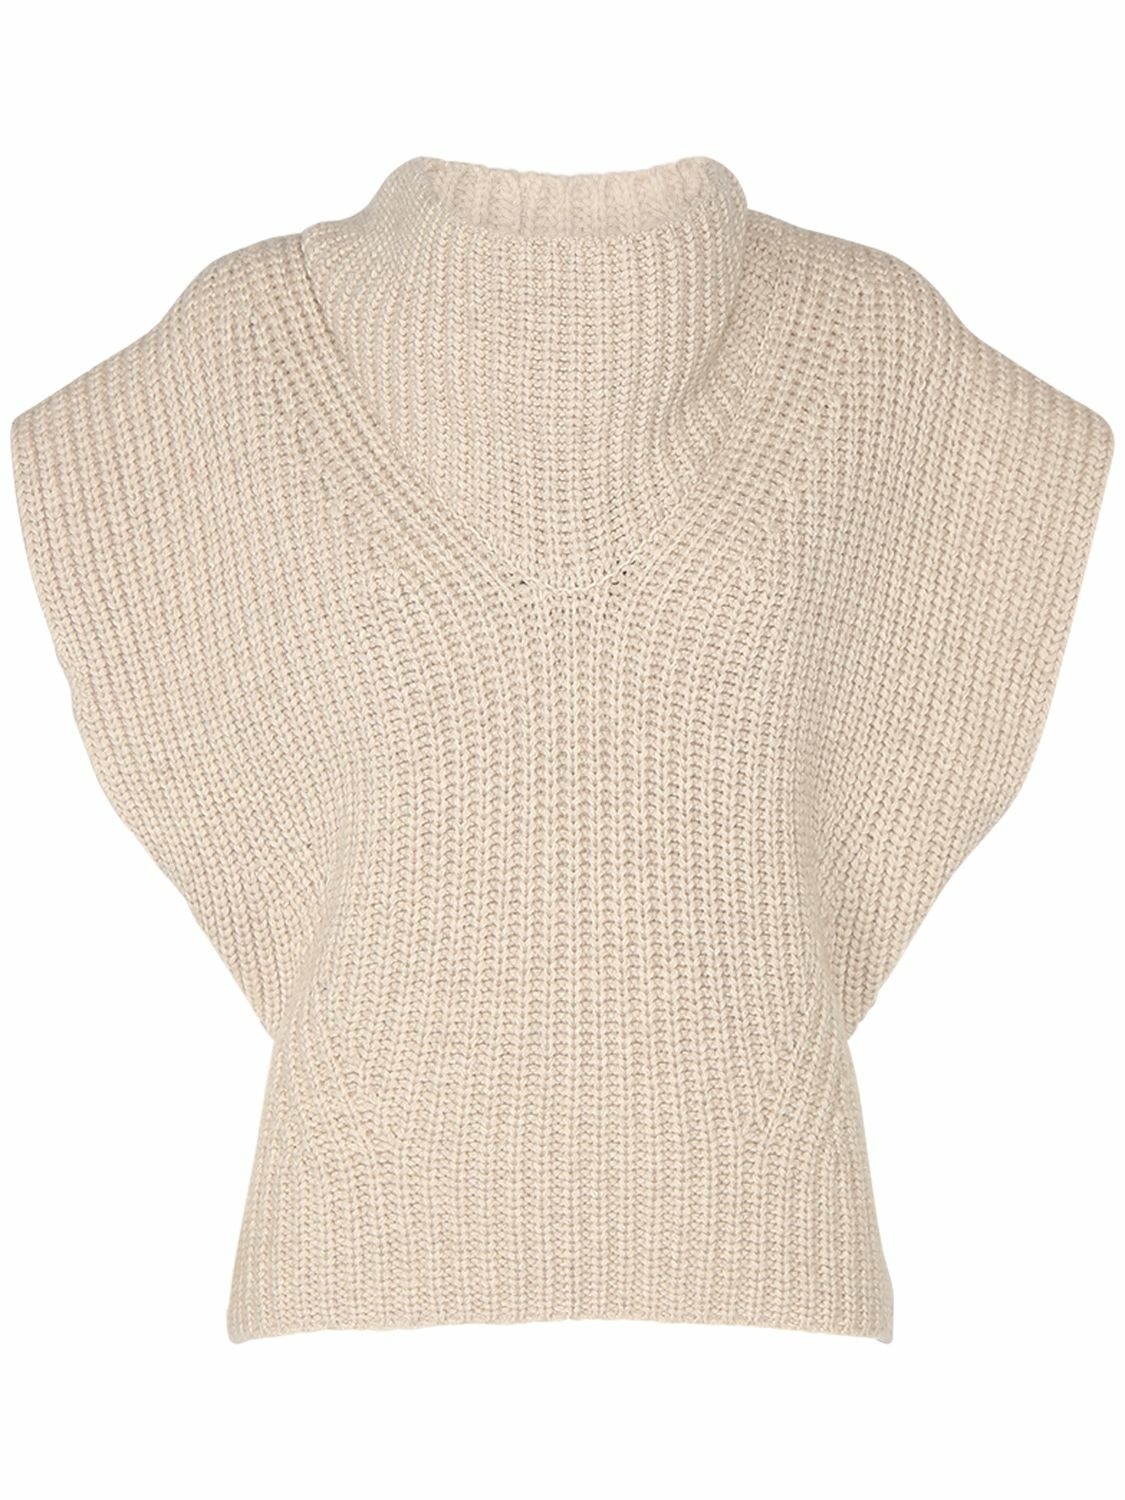 Photo: ISABEL MARANT - Laos Mohair & Cashmere Sweater